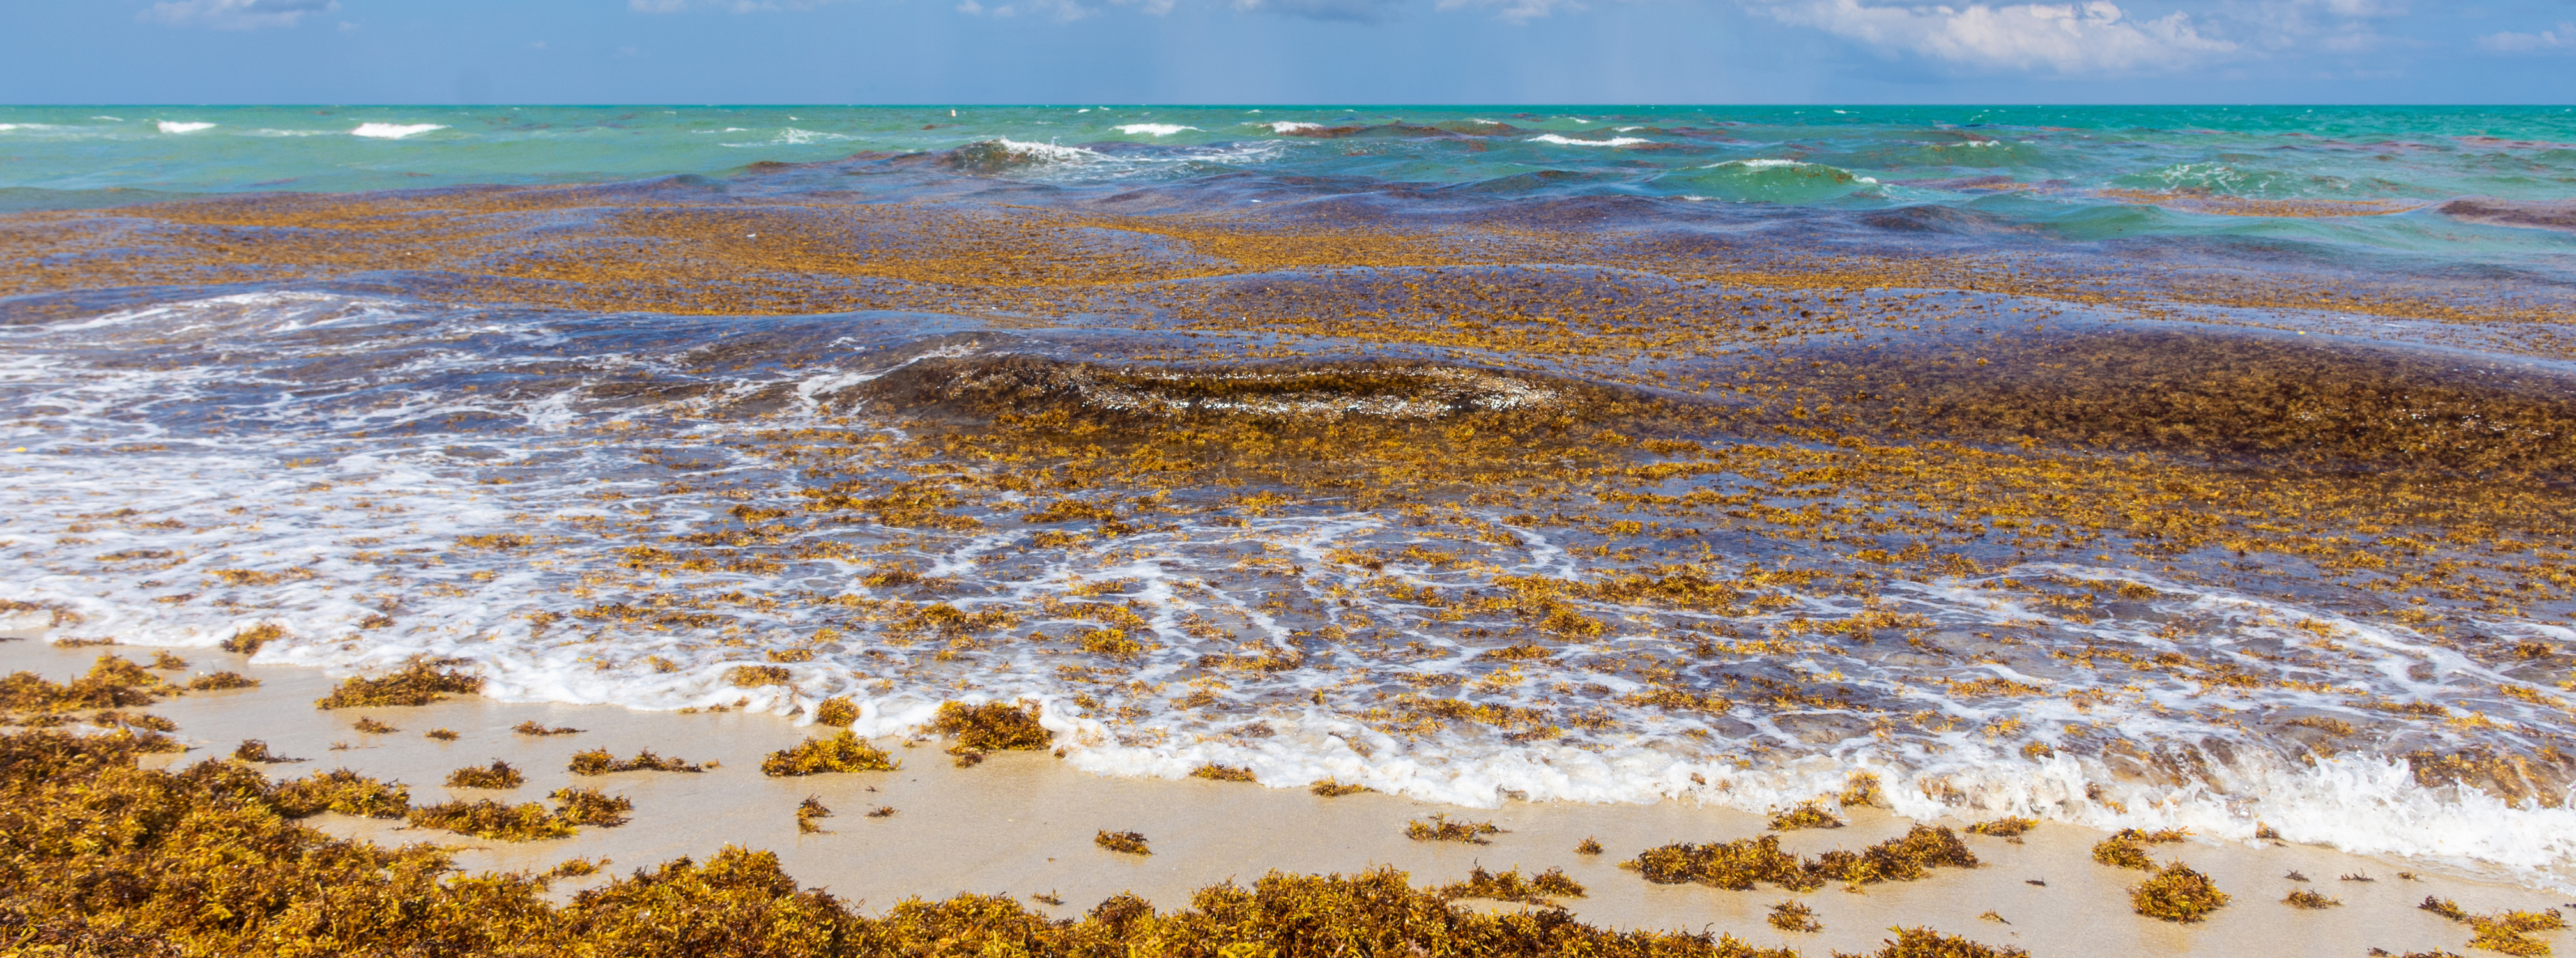 An image of a brown seaweed (sargassum) covering the sand on a beach and floating in the waves.